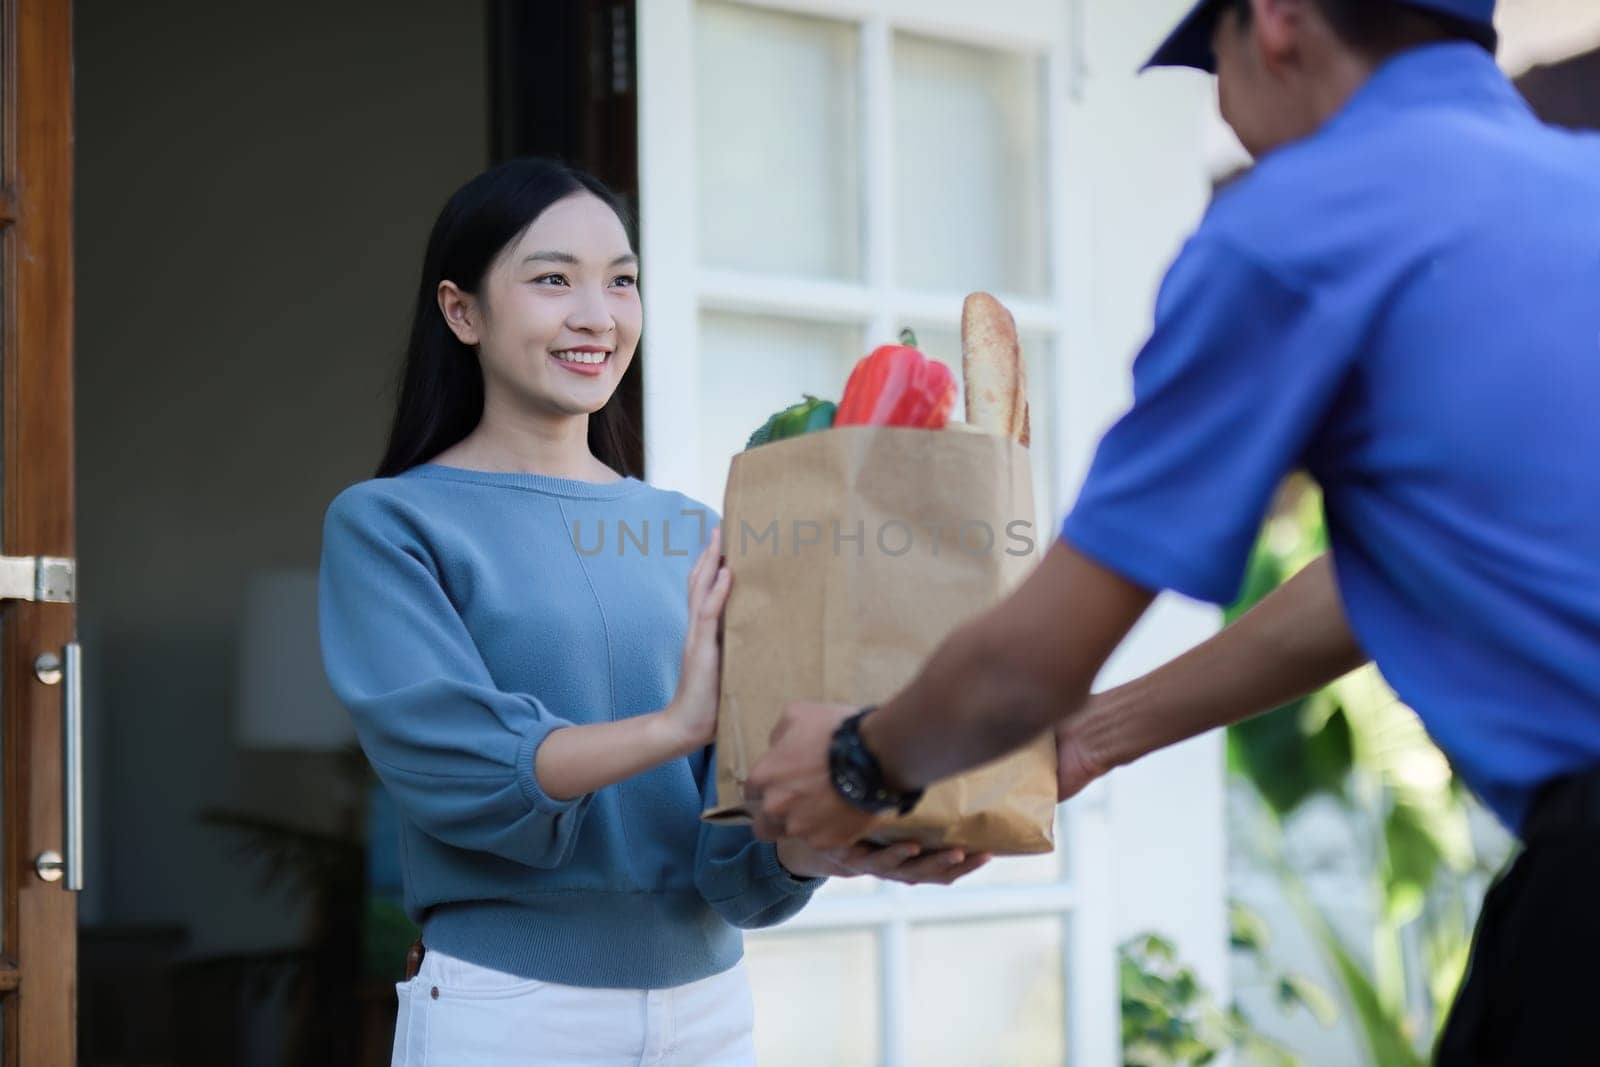 delivery man Deliver a paper bag package to the beautiful woman at the front of the house according to the order..